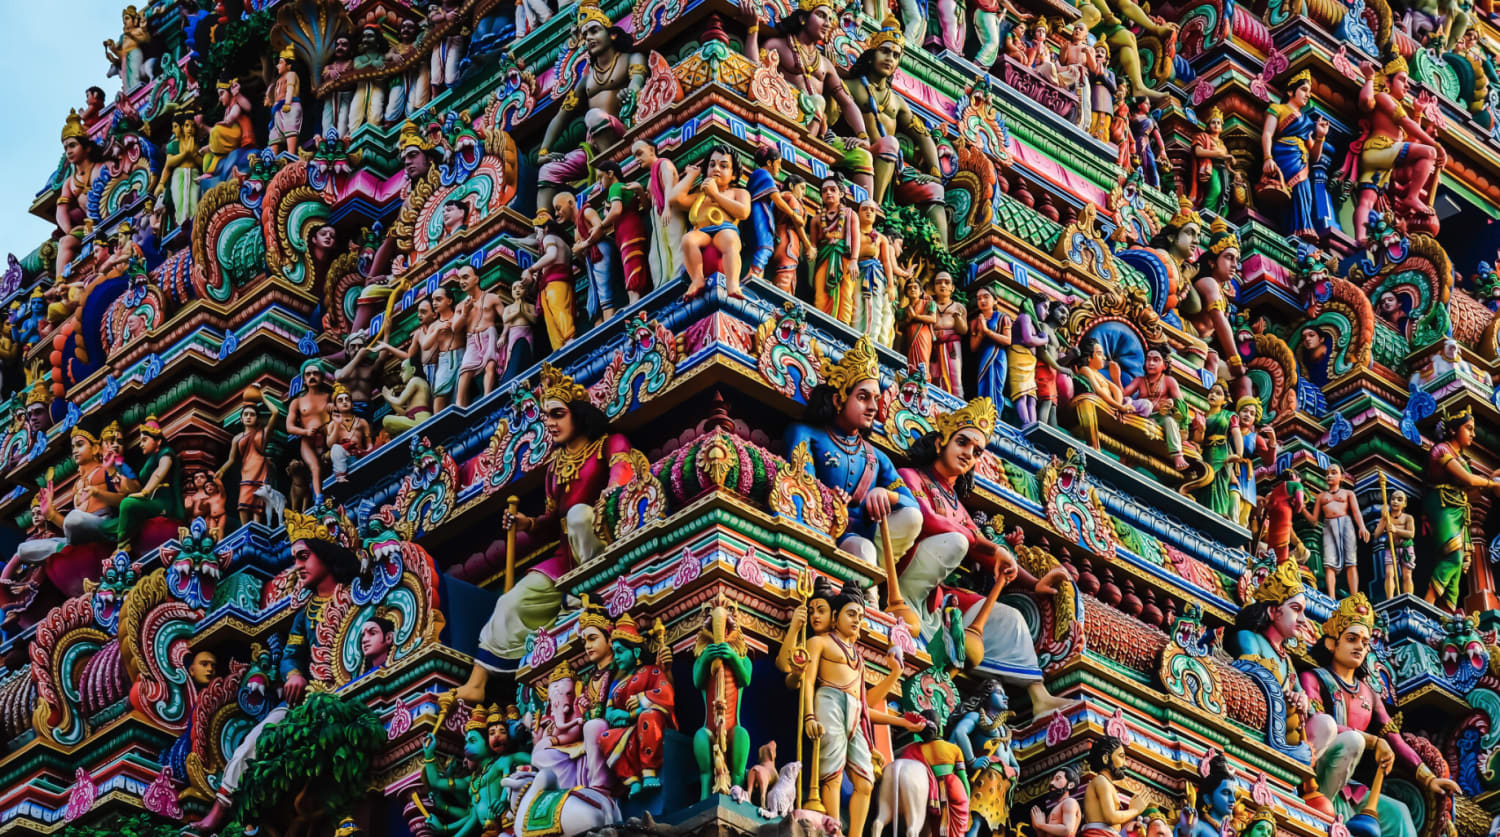 Detail of the main gopuram of Kapaleeshwarar Temple, Mylapore, India. The origins of this temple can be traced back to the 7th century AD. The current structure was built in the late 16th or early 17th century after the older temple was demolished by Portuguese settlers in 1566.